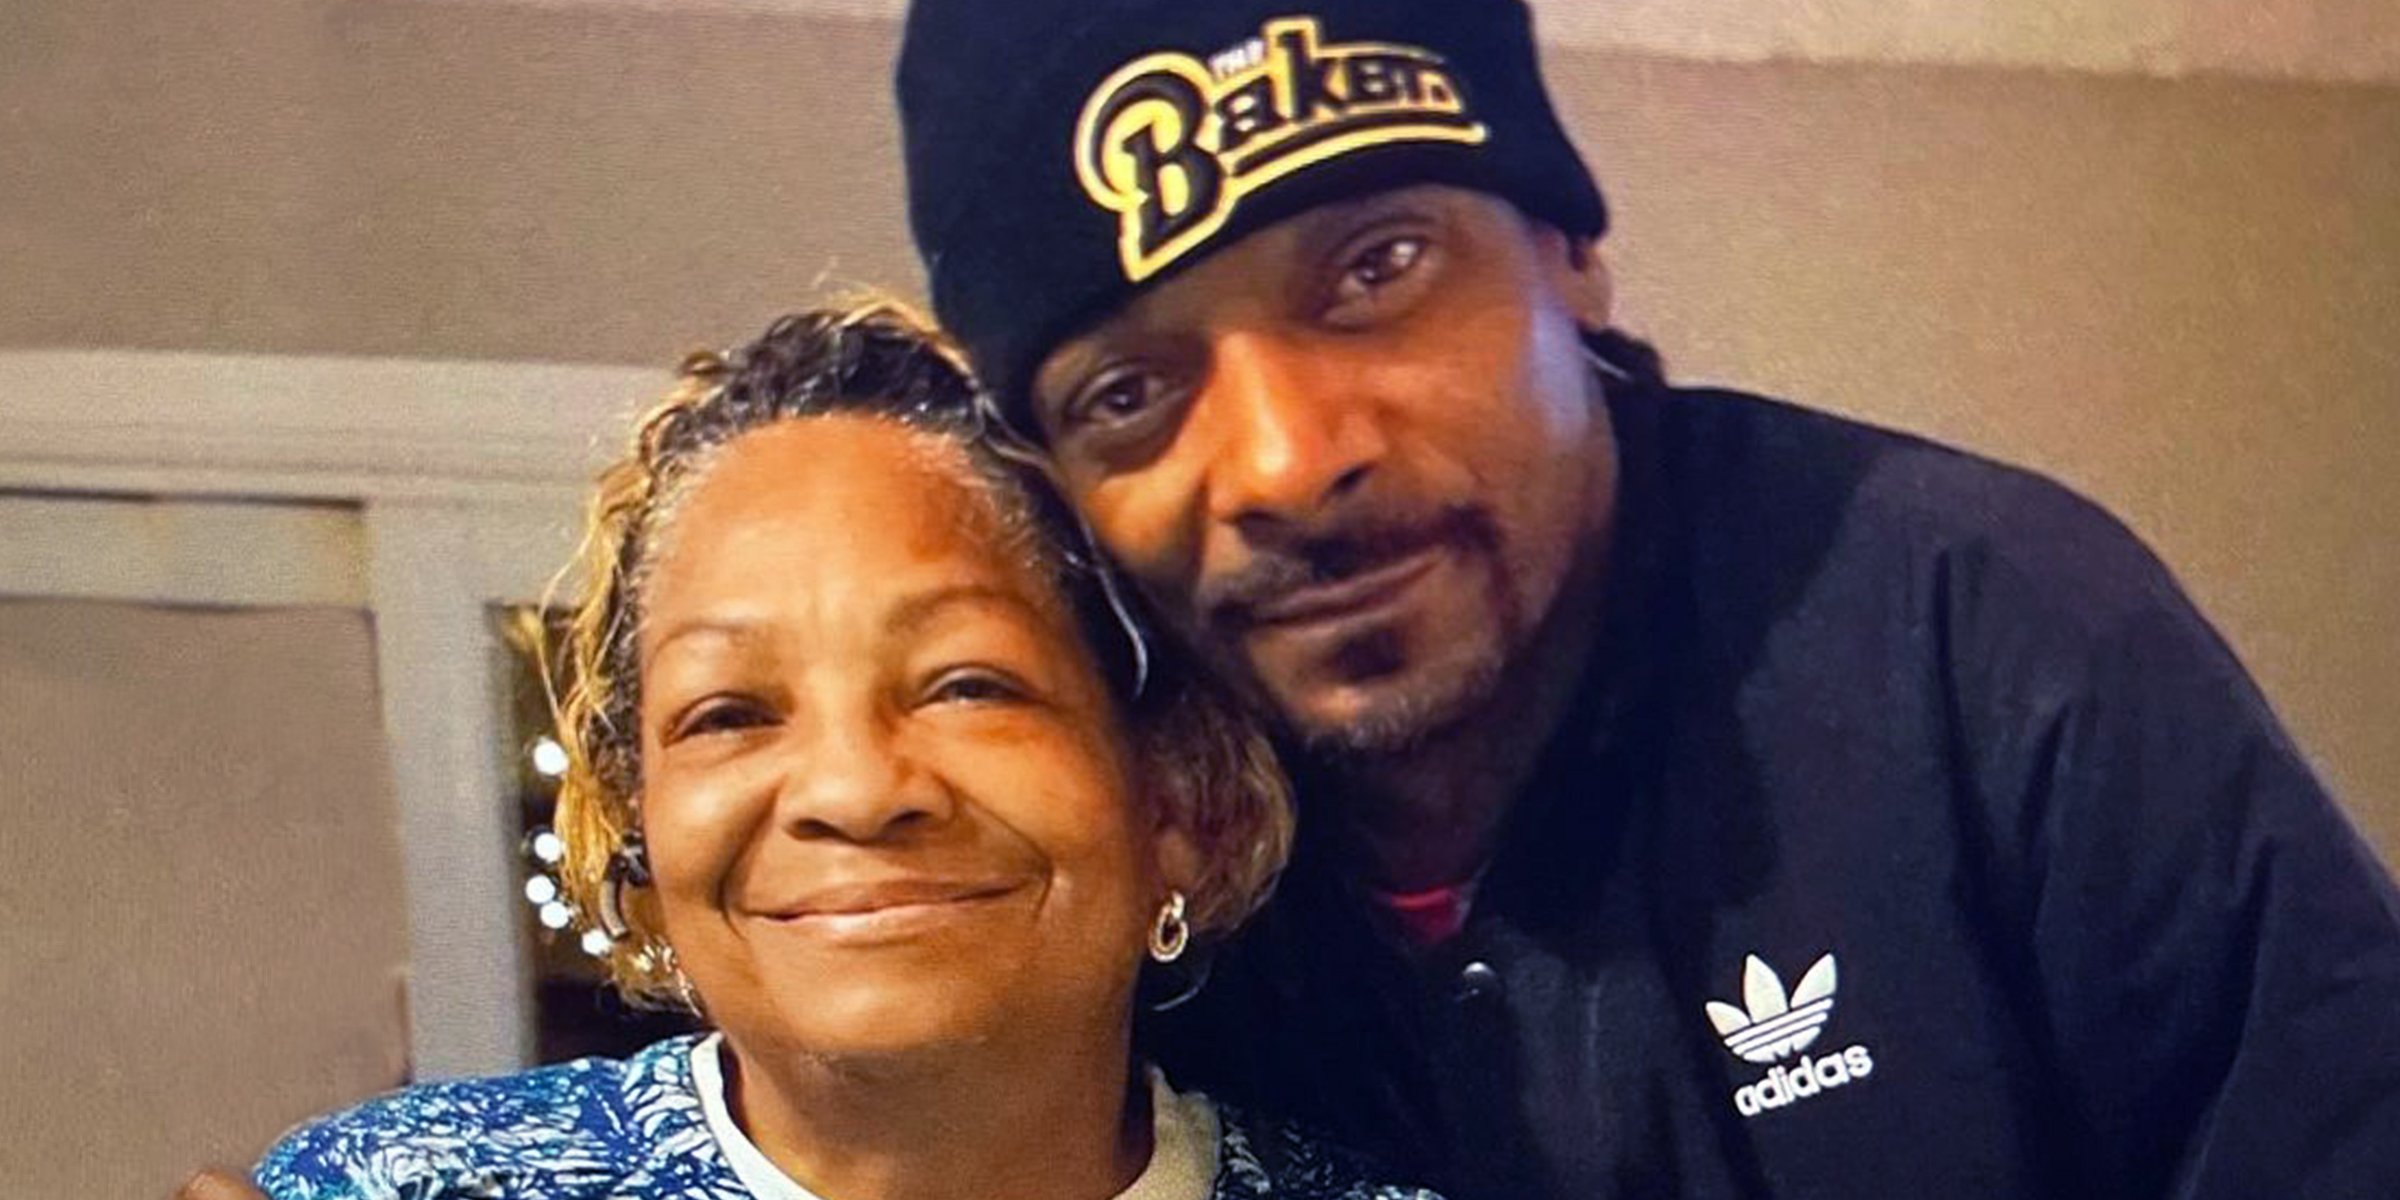 Beverly Tate and Snoop Dogg | Source: instagram.com/snoopdogg